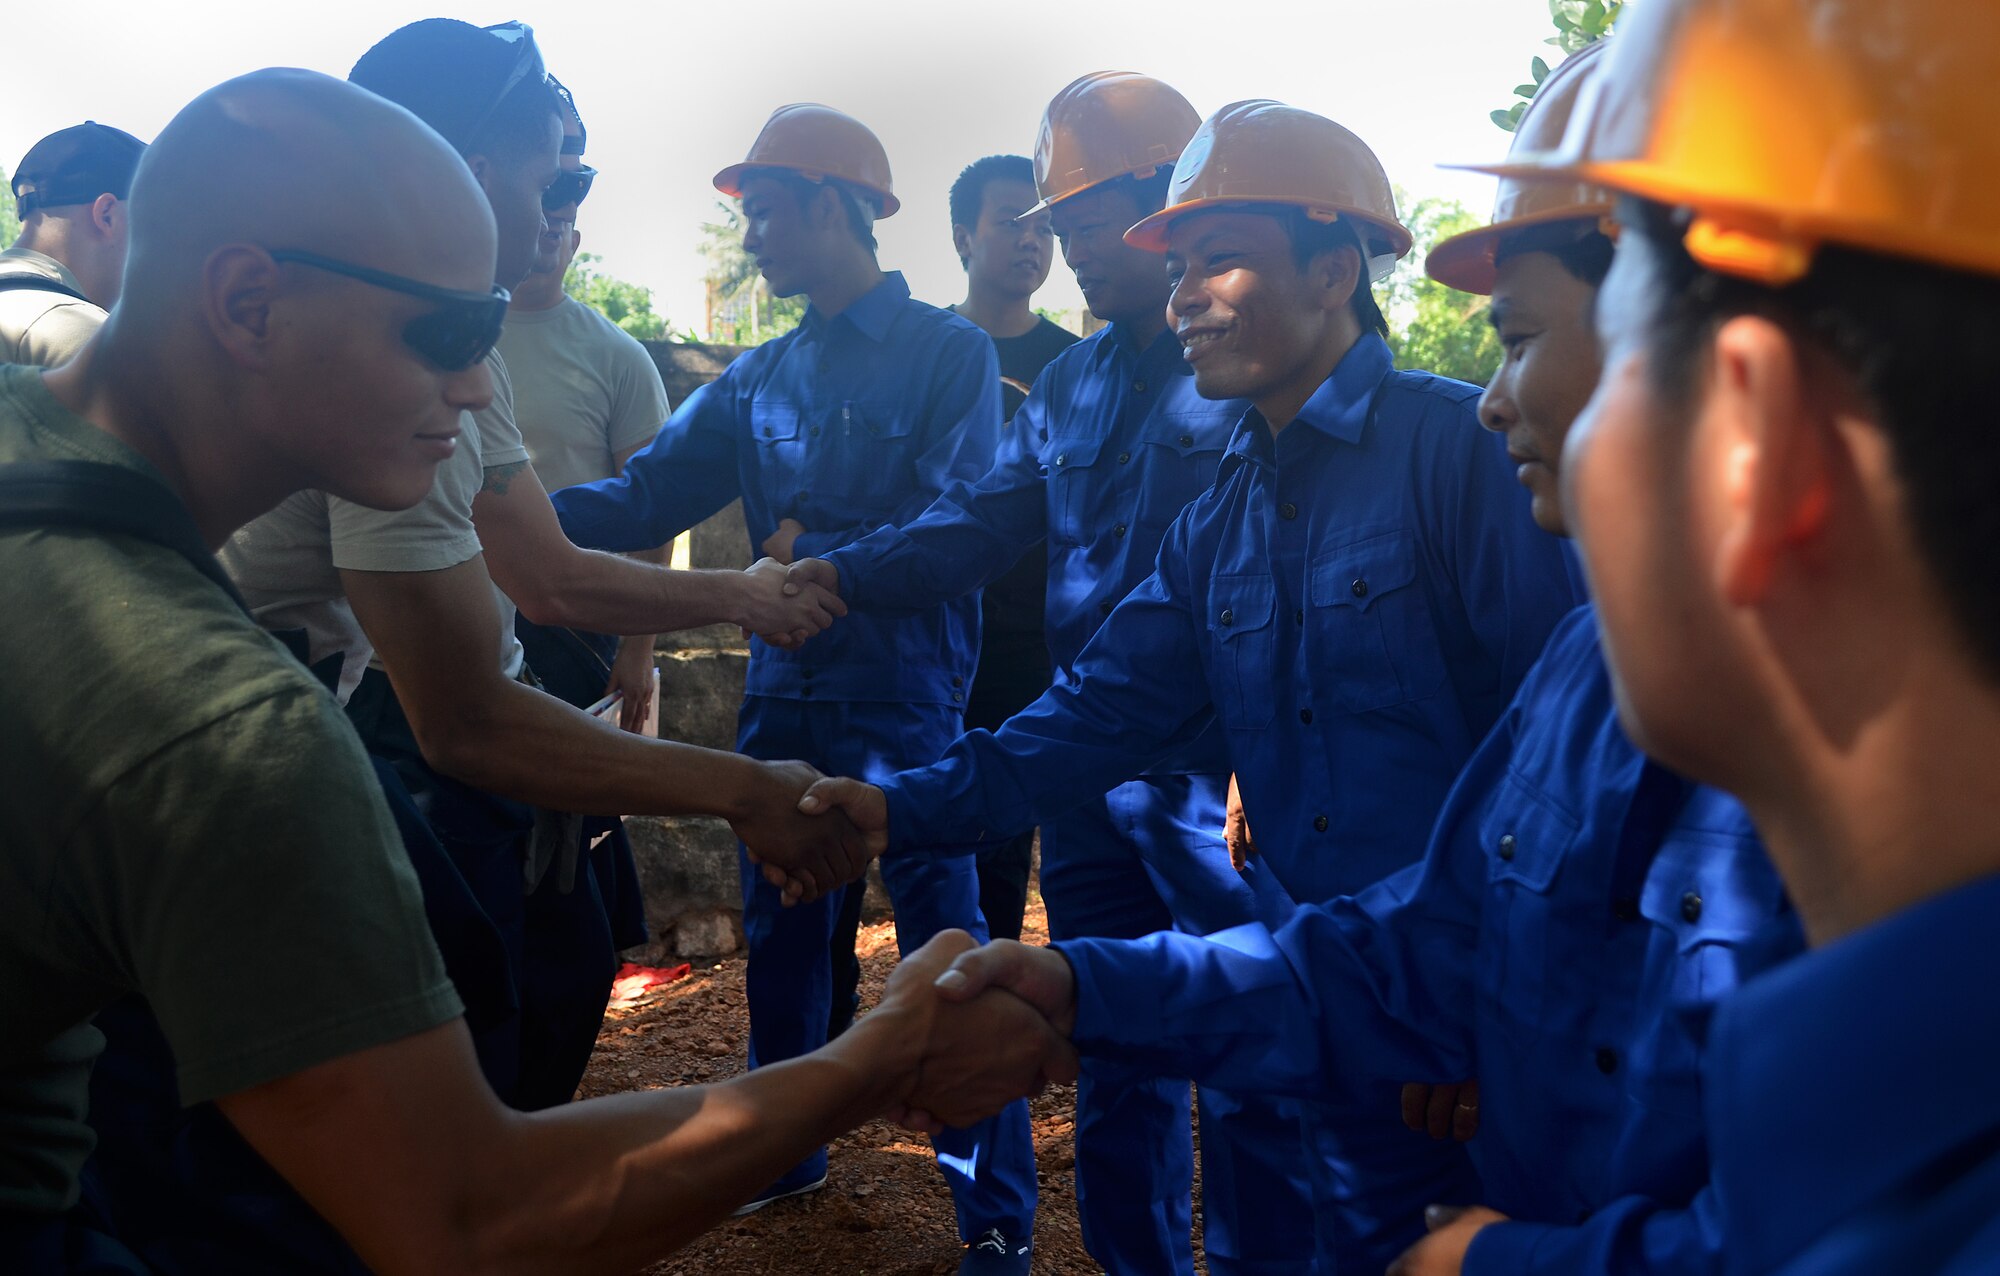 U.S. military members shake hands with local host nation construction workers before doing building repairs during Operation Pacific Angel 2013 in Dong Hoi, Quang Binh Province, Vietnam, June 9, 2013. Operation PACANGEL began June 10 and PACANGEL is a joint and combined humanitarian assistance exercise held in various countries several times a year and includes medical, dental, optometry, engineering programs and a variety of subject-matter expert exchanges. (U.S. Air Force photo by Capt. Sara Greco)